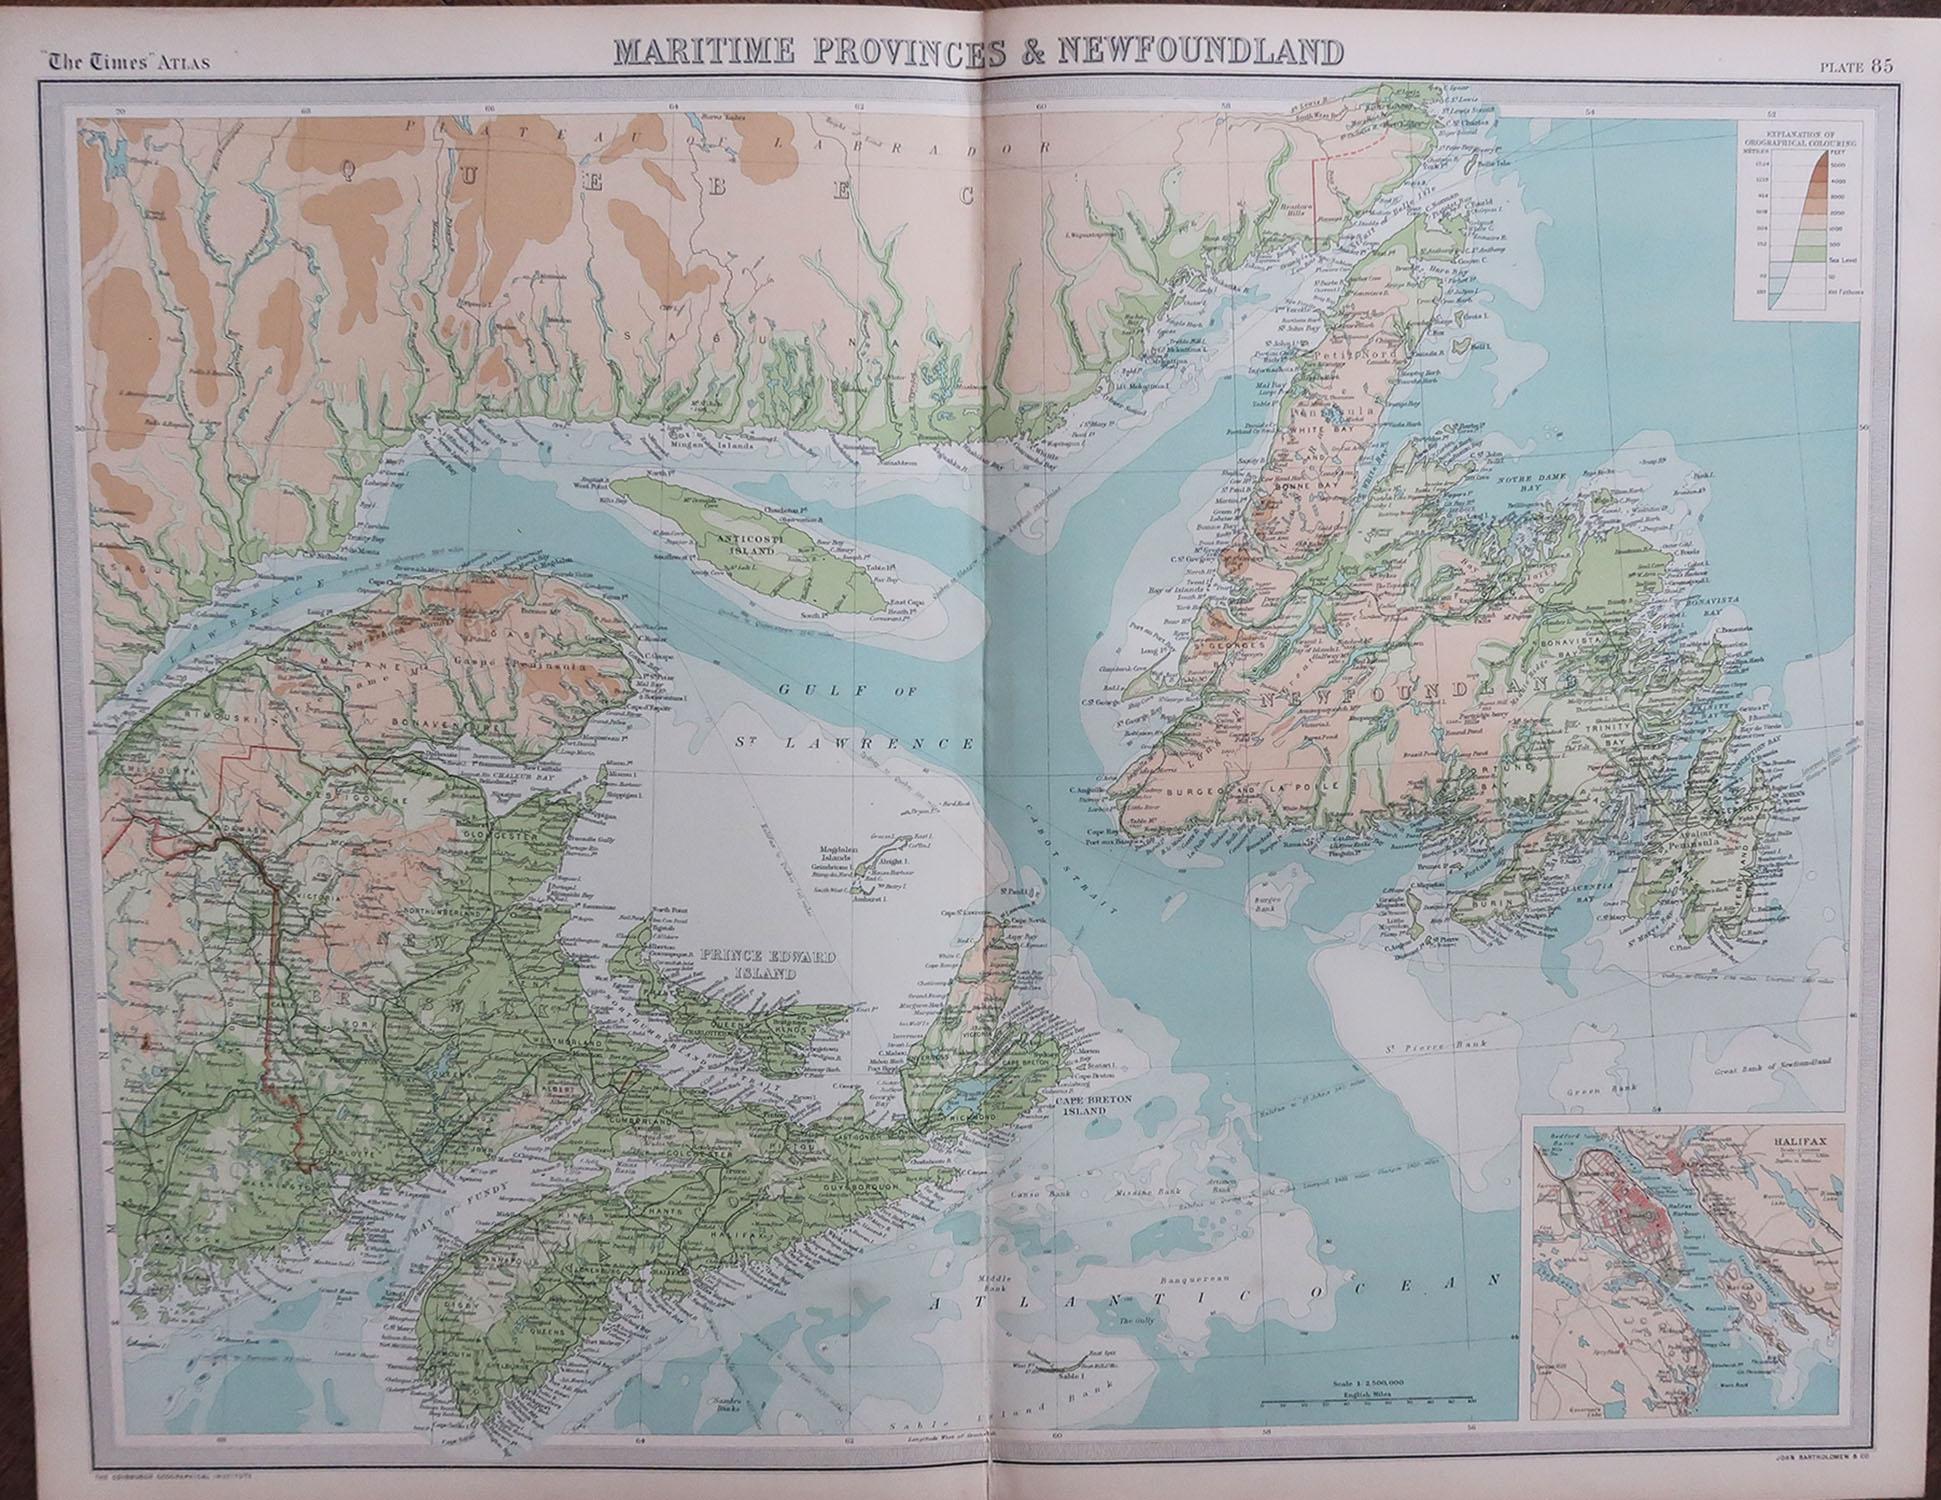 Great map of The Maritime provinces

Unframed

Original color

By John Bartholomew and Co. Edinburgh Geographical Institute

Published, circa 1920

Free shipping.
 